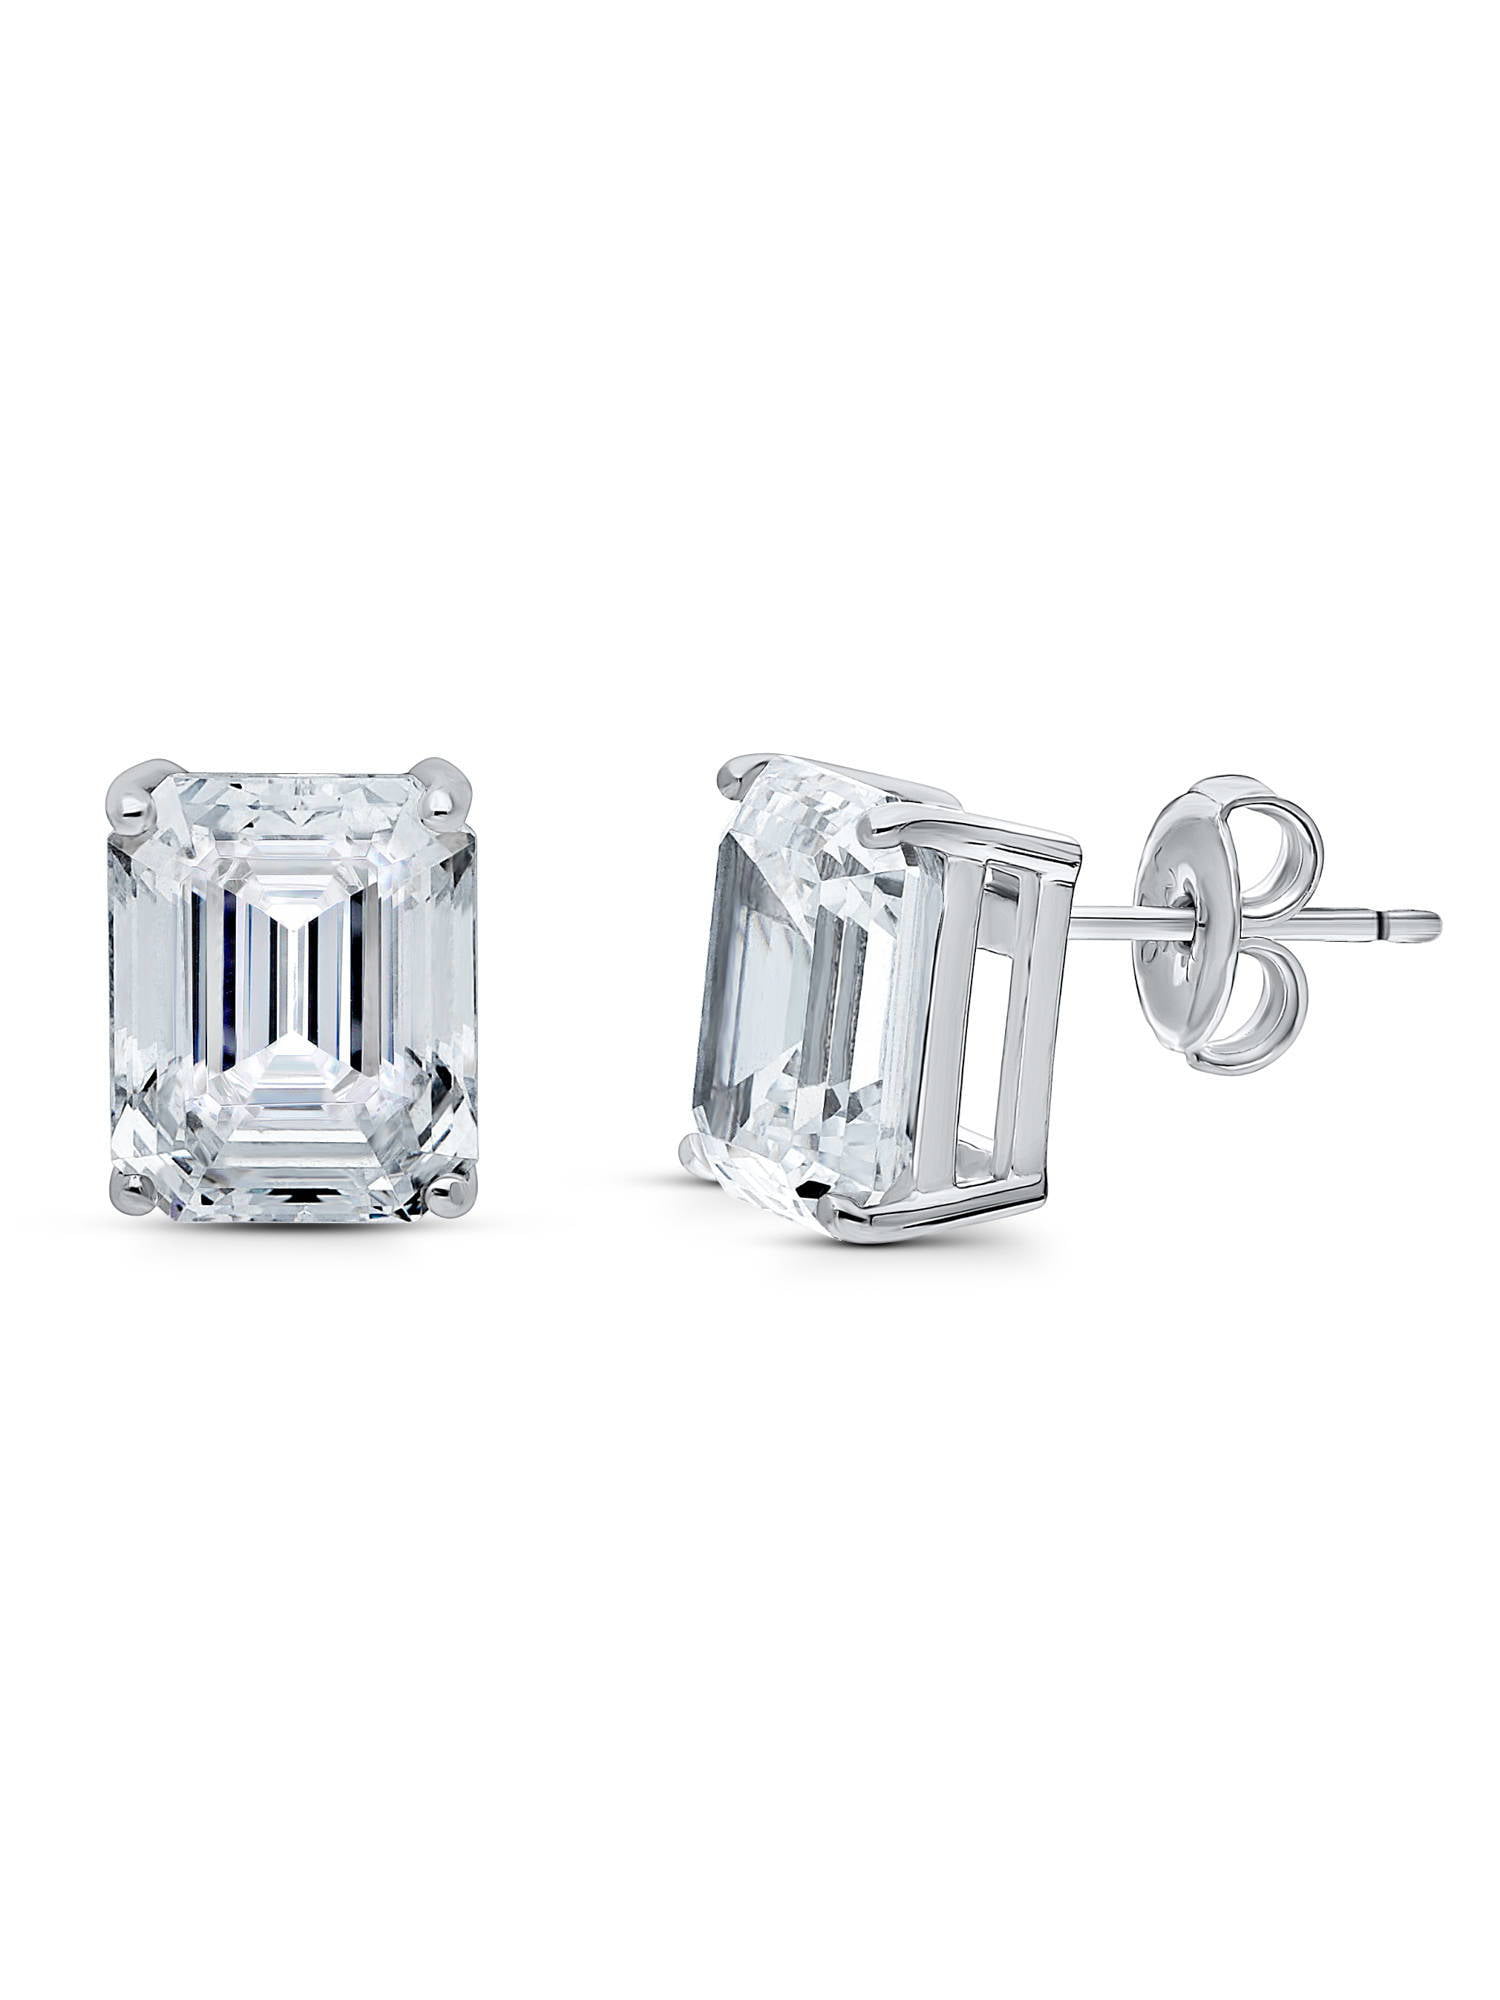 BERRICLE Rhodium Plated Sterling Silver Cubic Zirconia CZ Love Knot Wedding Stud Earrings